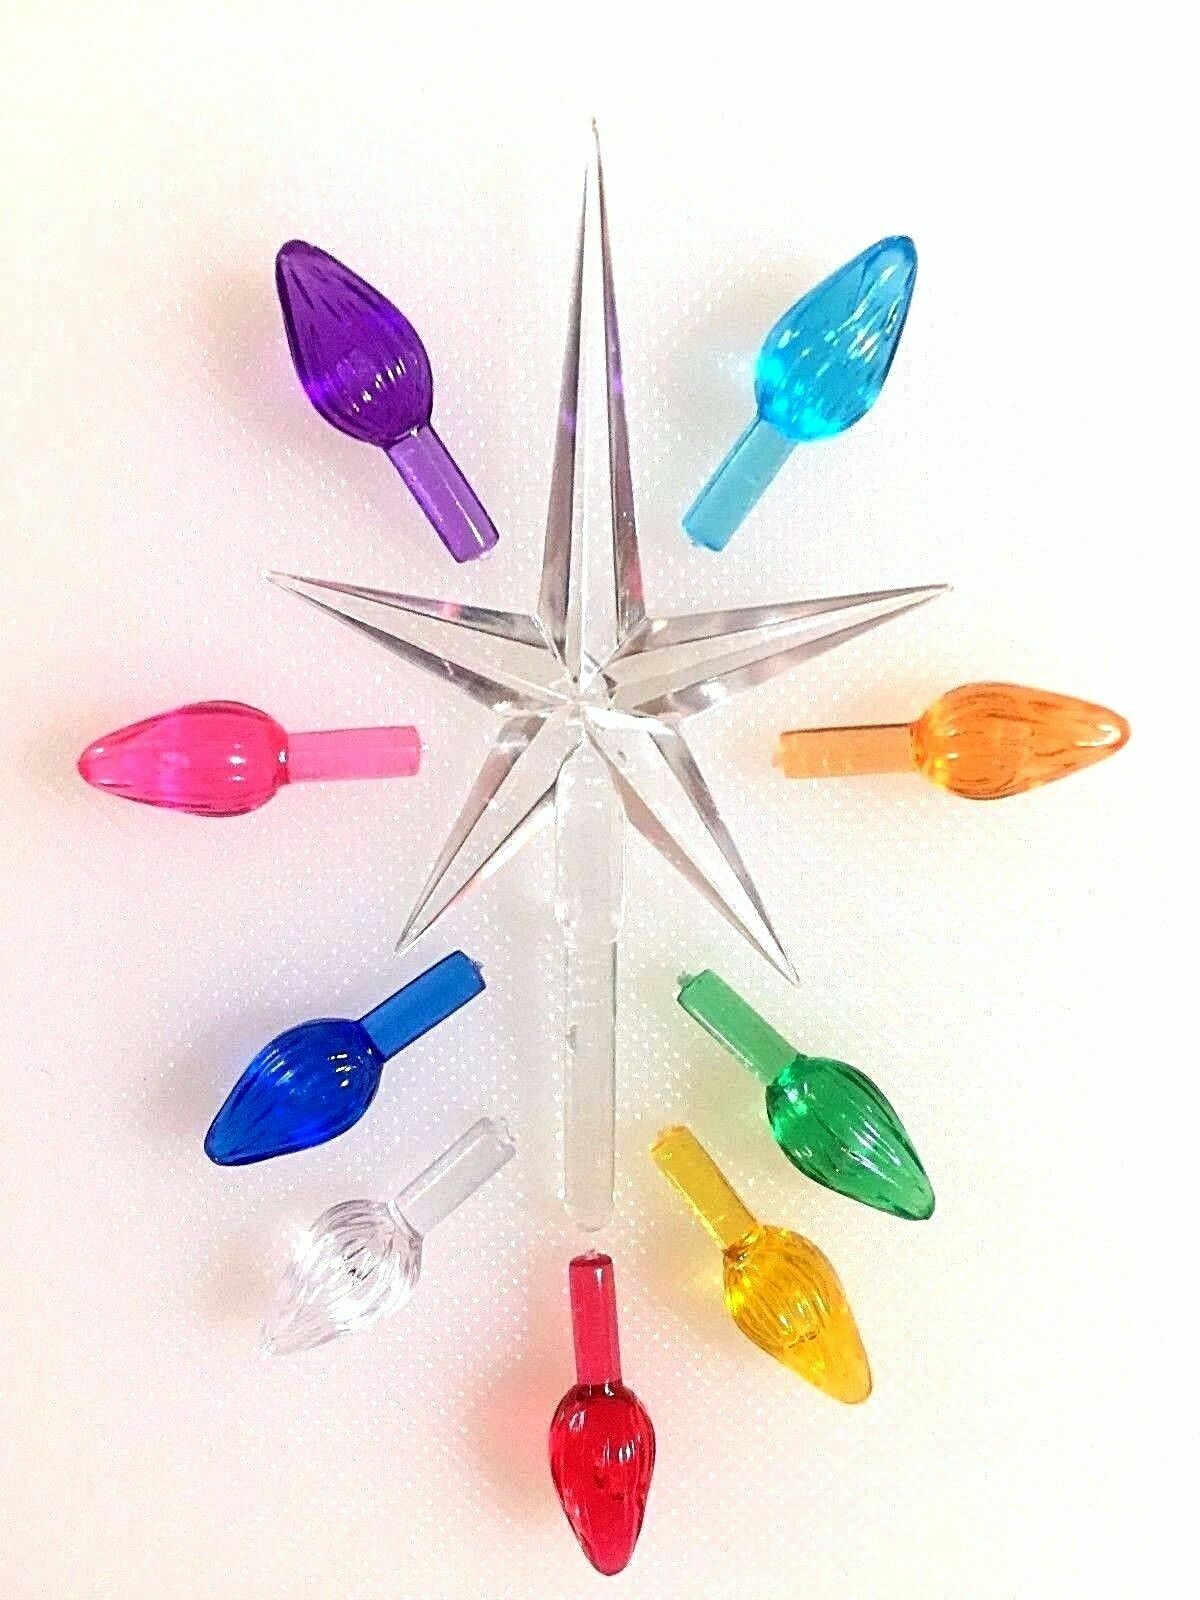 100 Small Twist Bulbs(9 COLORS) + Clear Med Star for Ceramic Christmas Tree